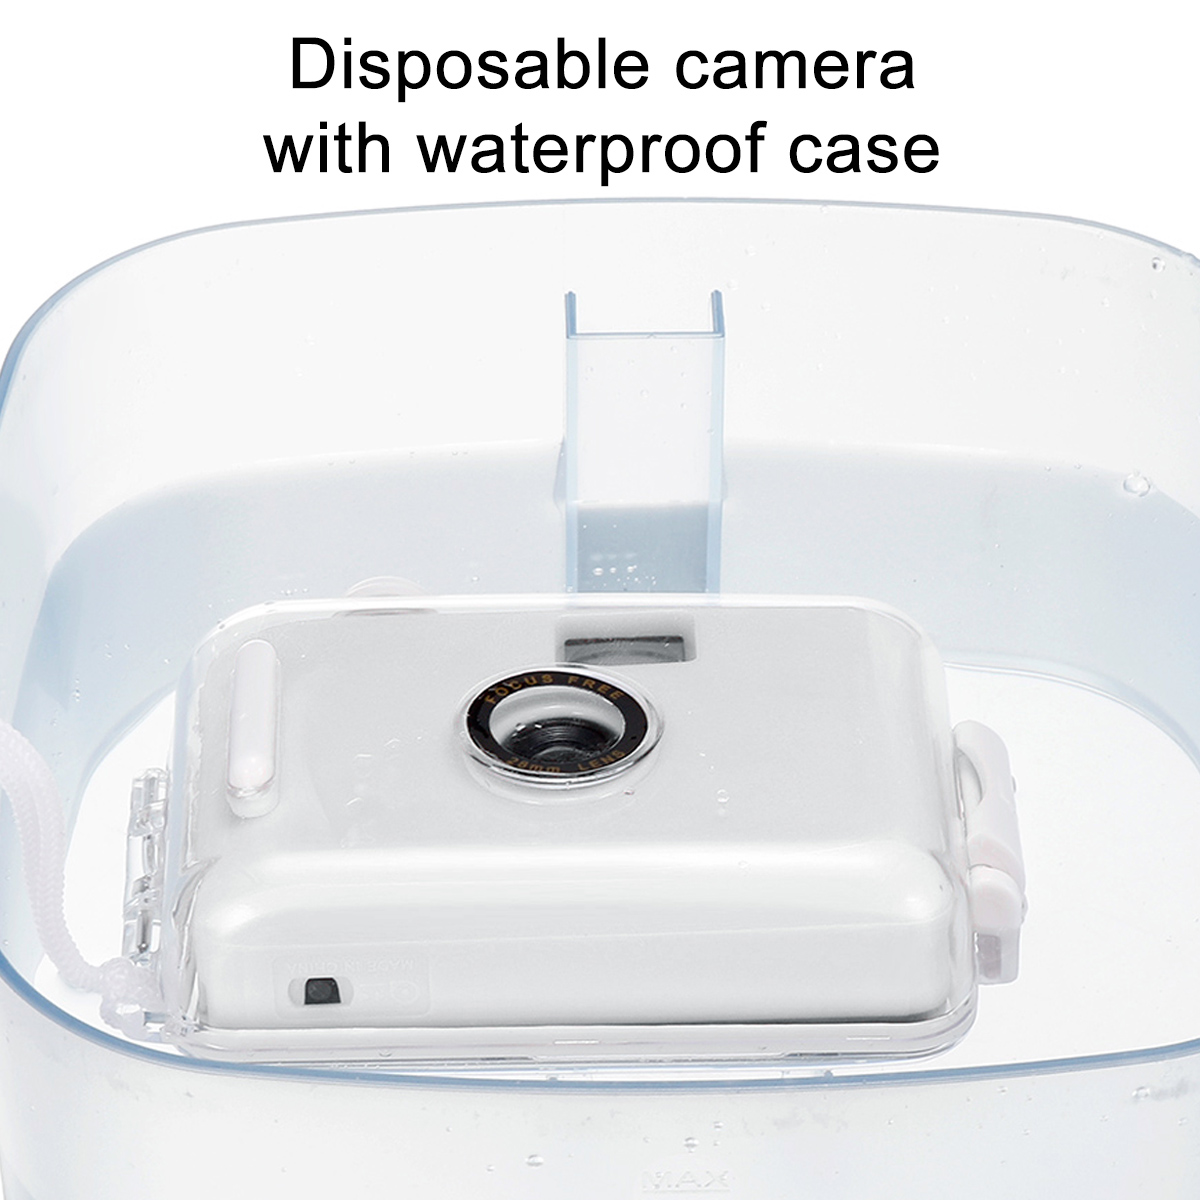 Waterproof-Disposable-Camera-Portable-Film-Camera-With-DIY-Case-for-Graduation-Trip-Christmas-1952625-4